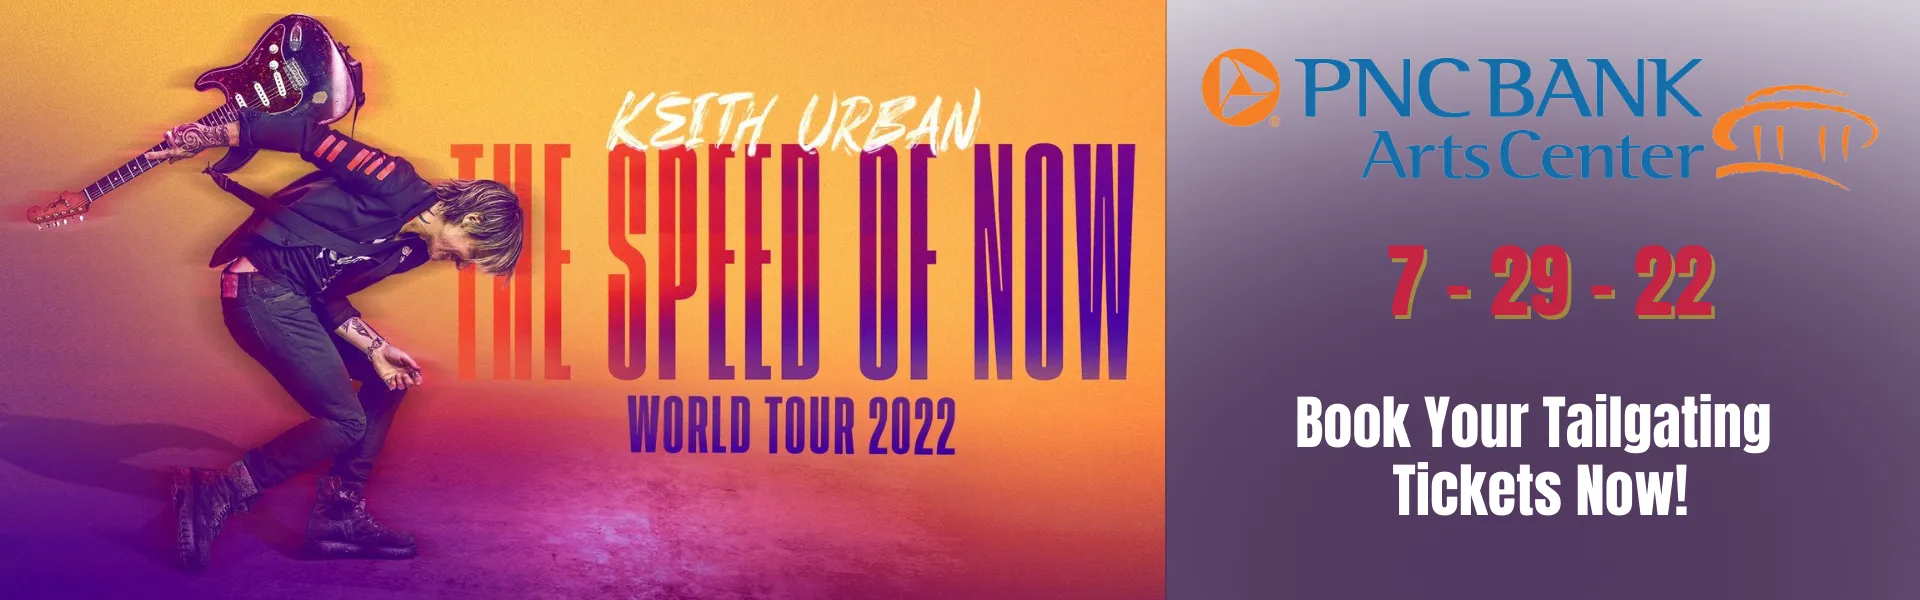 Keith urban the speed of now world tour PNC Arts center tailgate